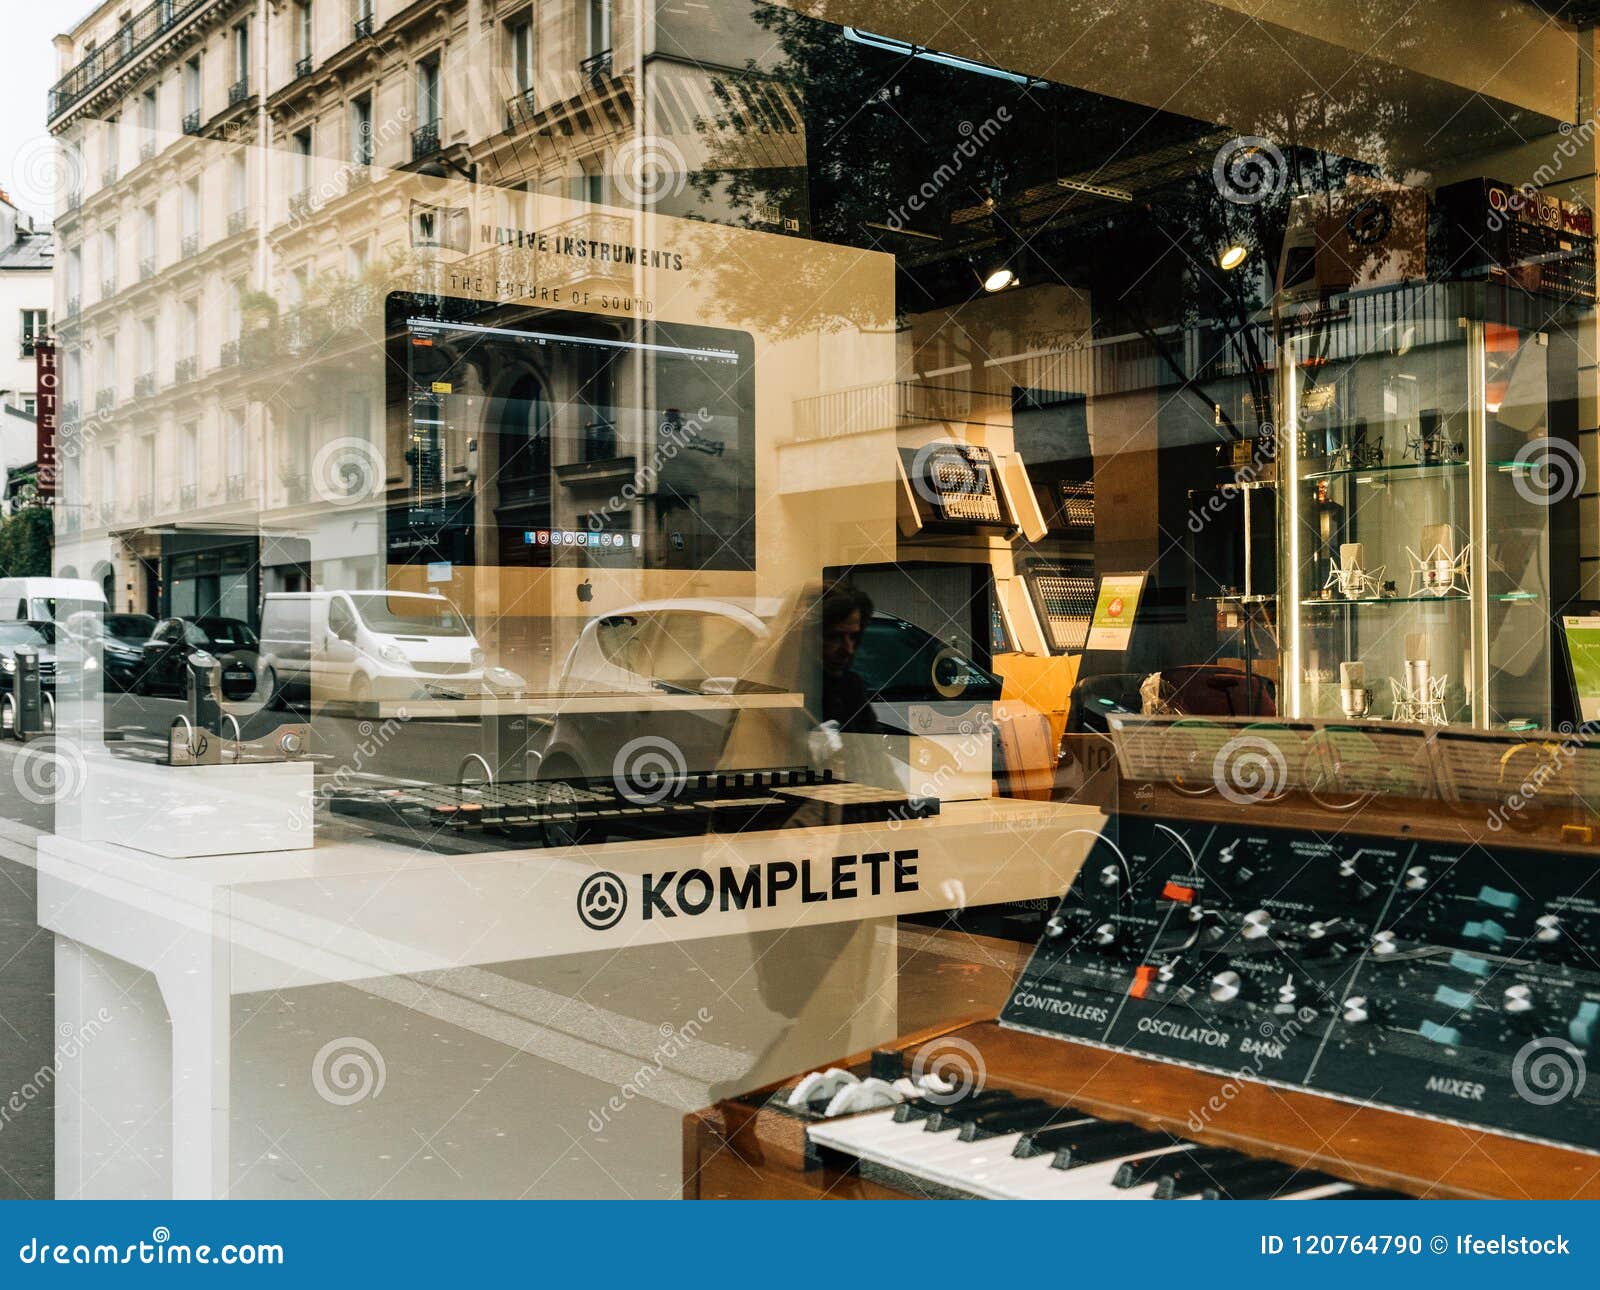 Native Instruments Komplete Set for Music Creators Editorial Image - Image  of power, electronics: 120764790